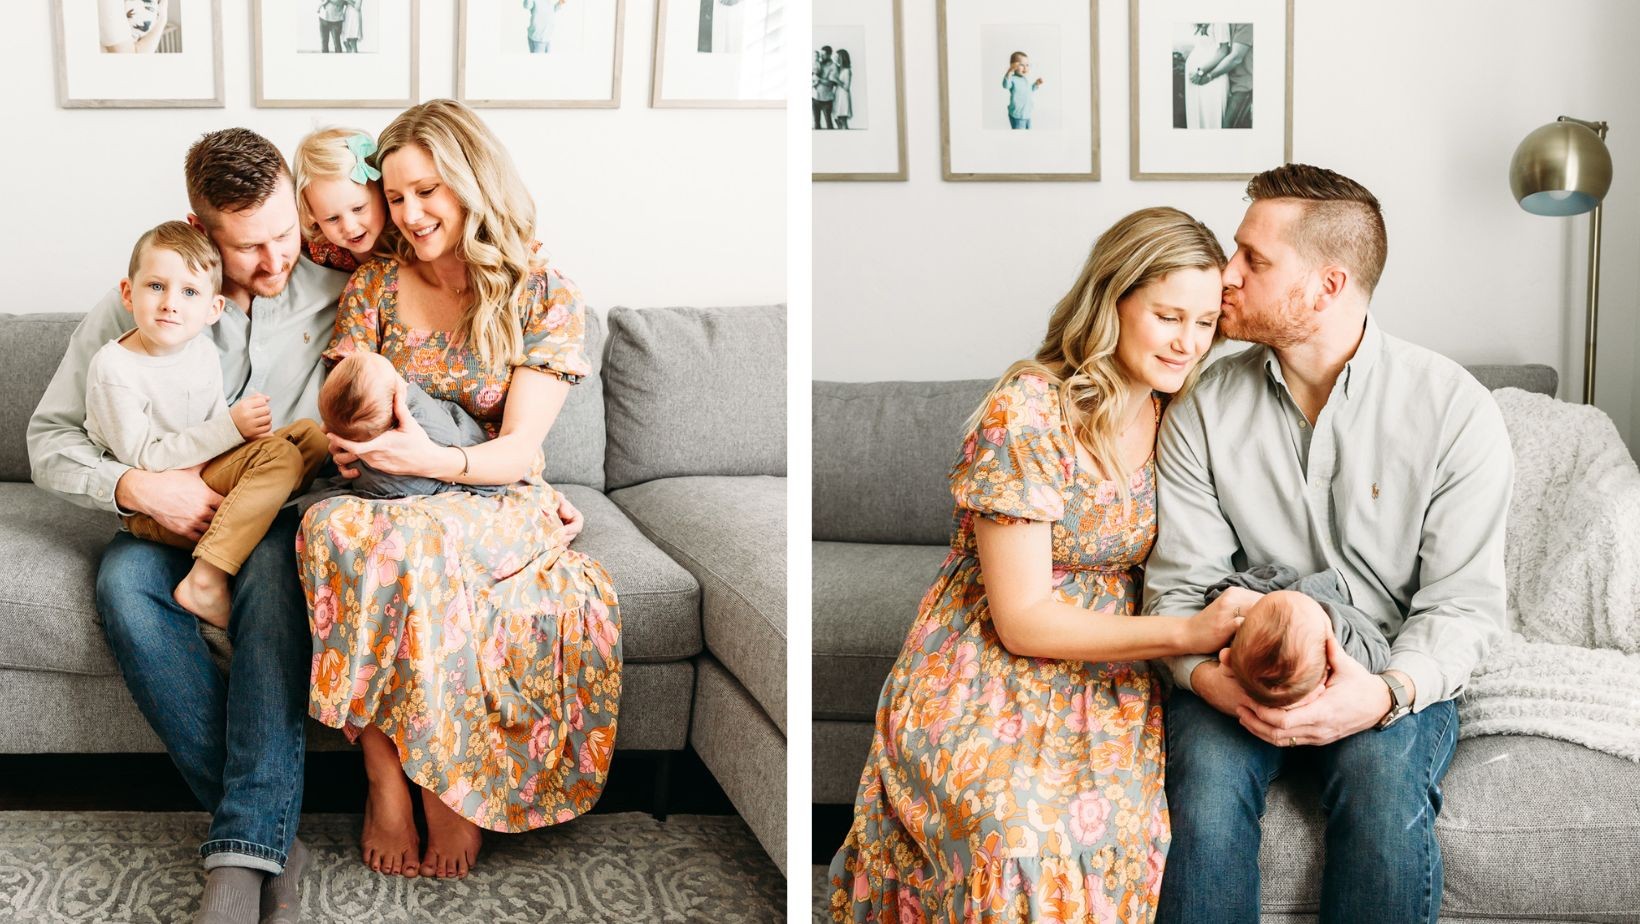 Newborn photos in a family of 5 home in OKC.